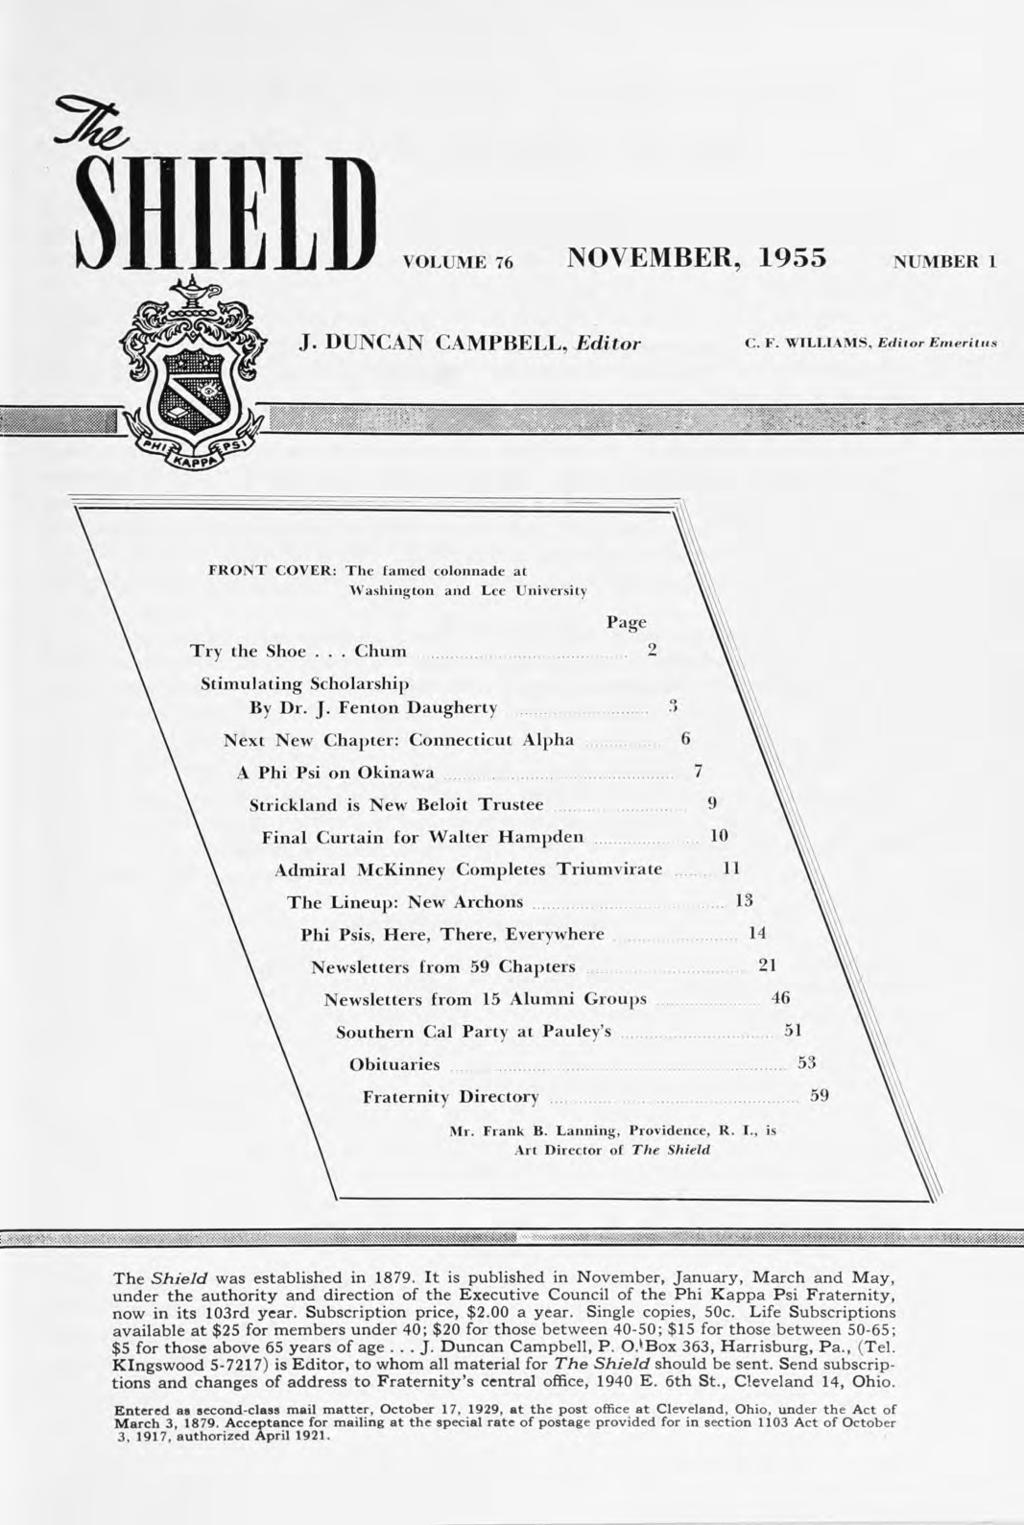 SHIELD VOLUME 76 NOVEMBER, 1955 NUMBER i J. DUNCAN CAMPBELL, Editor C. F. WILLIAMS, Editor Emeriliis FRONT COVER: The famed colonnade at Washington and Lee University Page Try the Shoe.